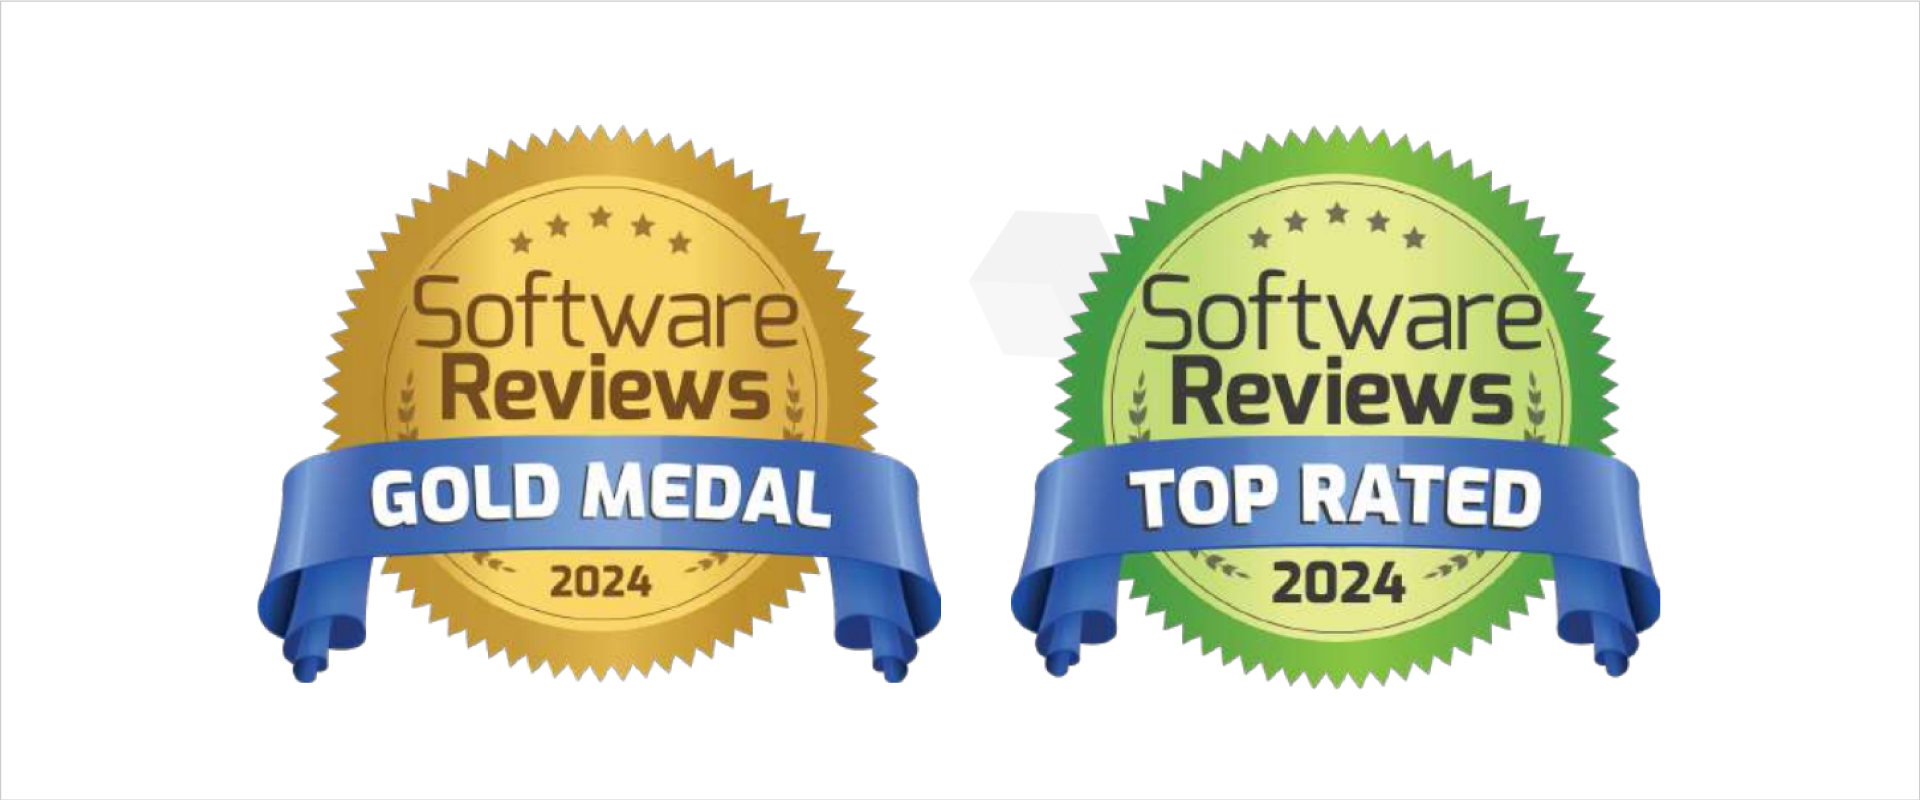 SearchUnify Ranked #1 in Enterprise Search Quadrant Report by Info-Tech Research Group’s SoftwareReviews